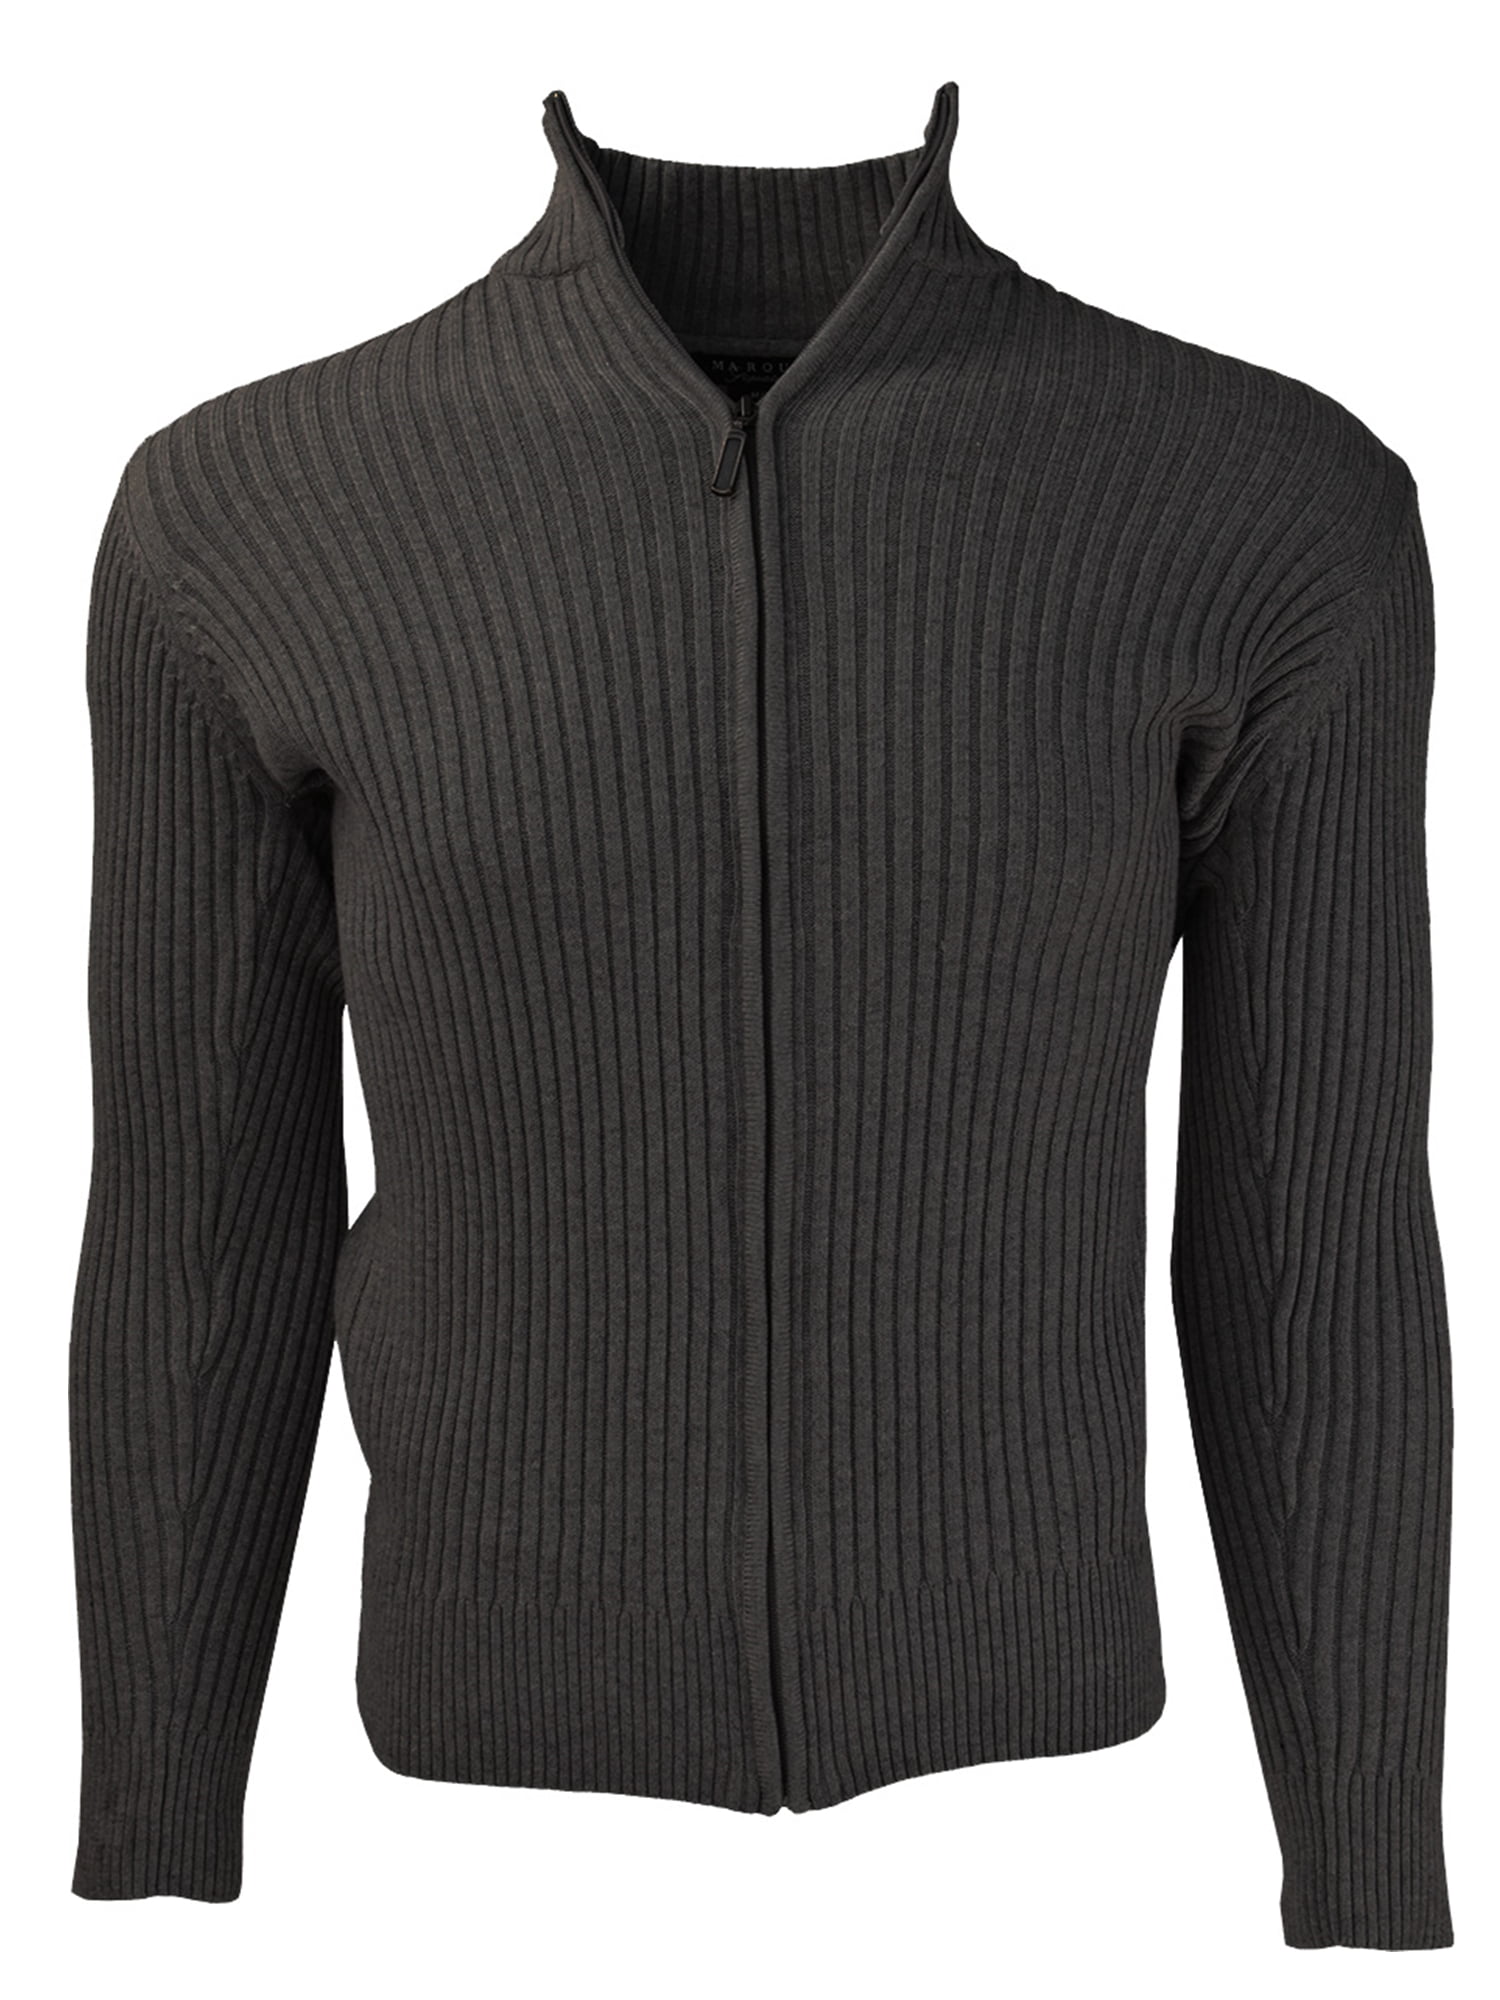 TheDapperTie - Full Zip Ribbed Mock Turtleneck 100% Cotton Cardigan For